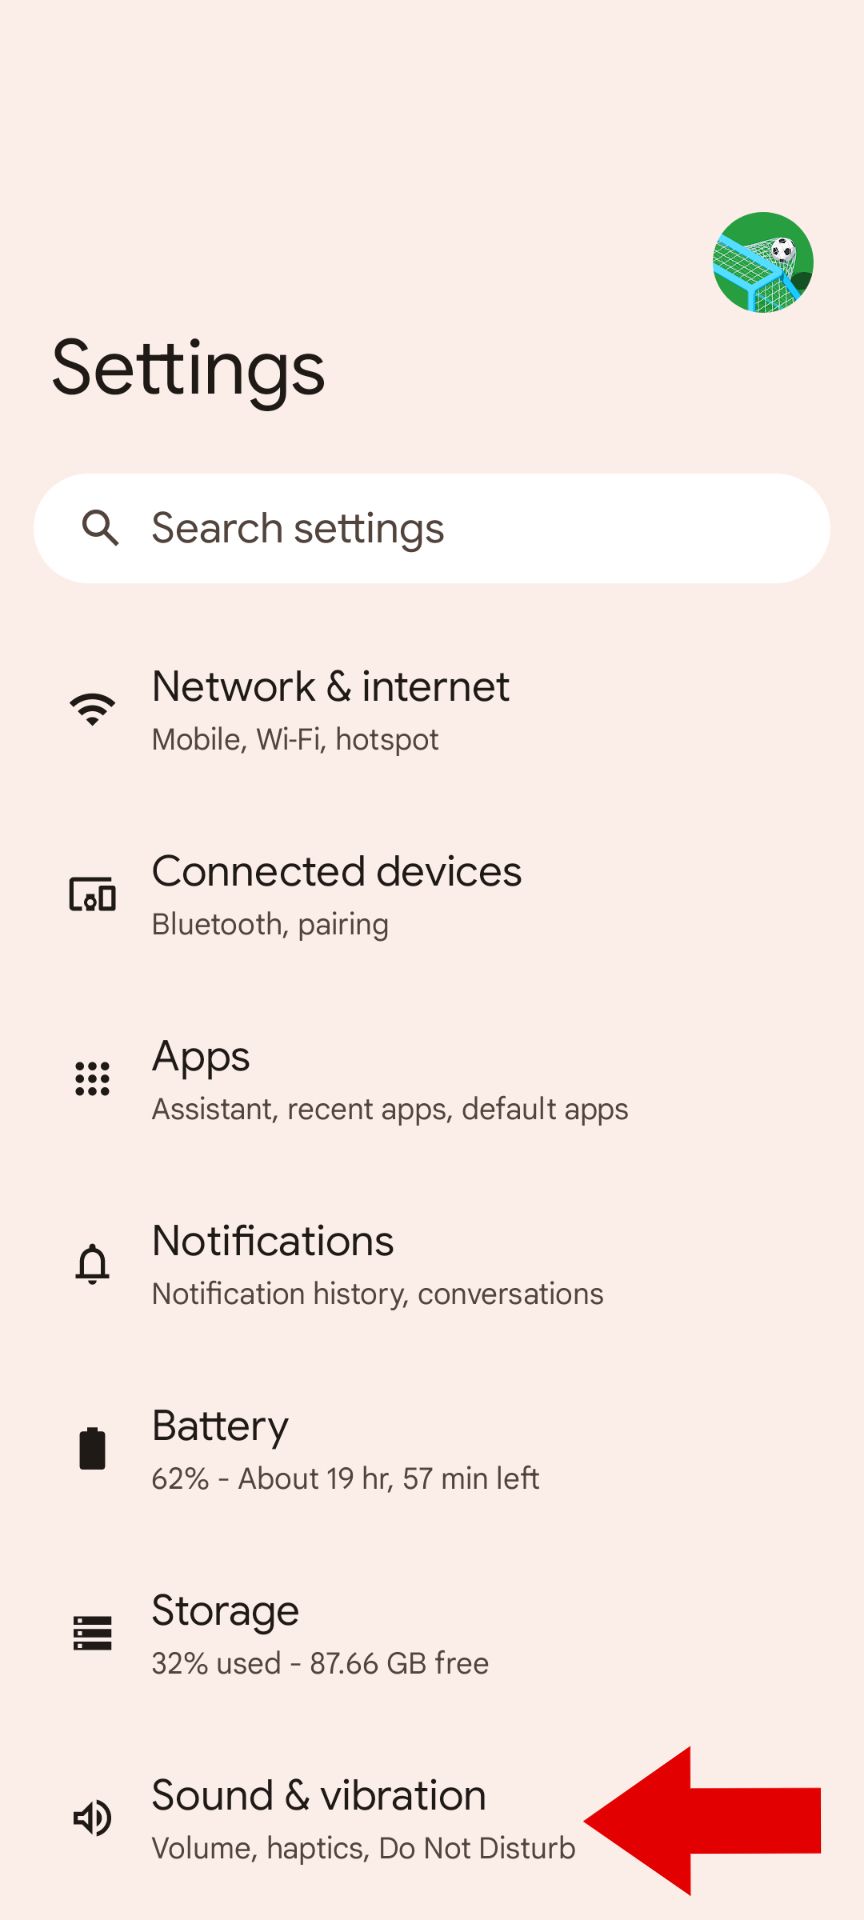 The Pixel phone Settings app with an arrow pointing to the Sound & vibration section